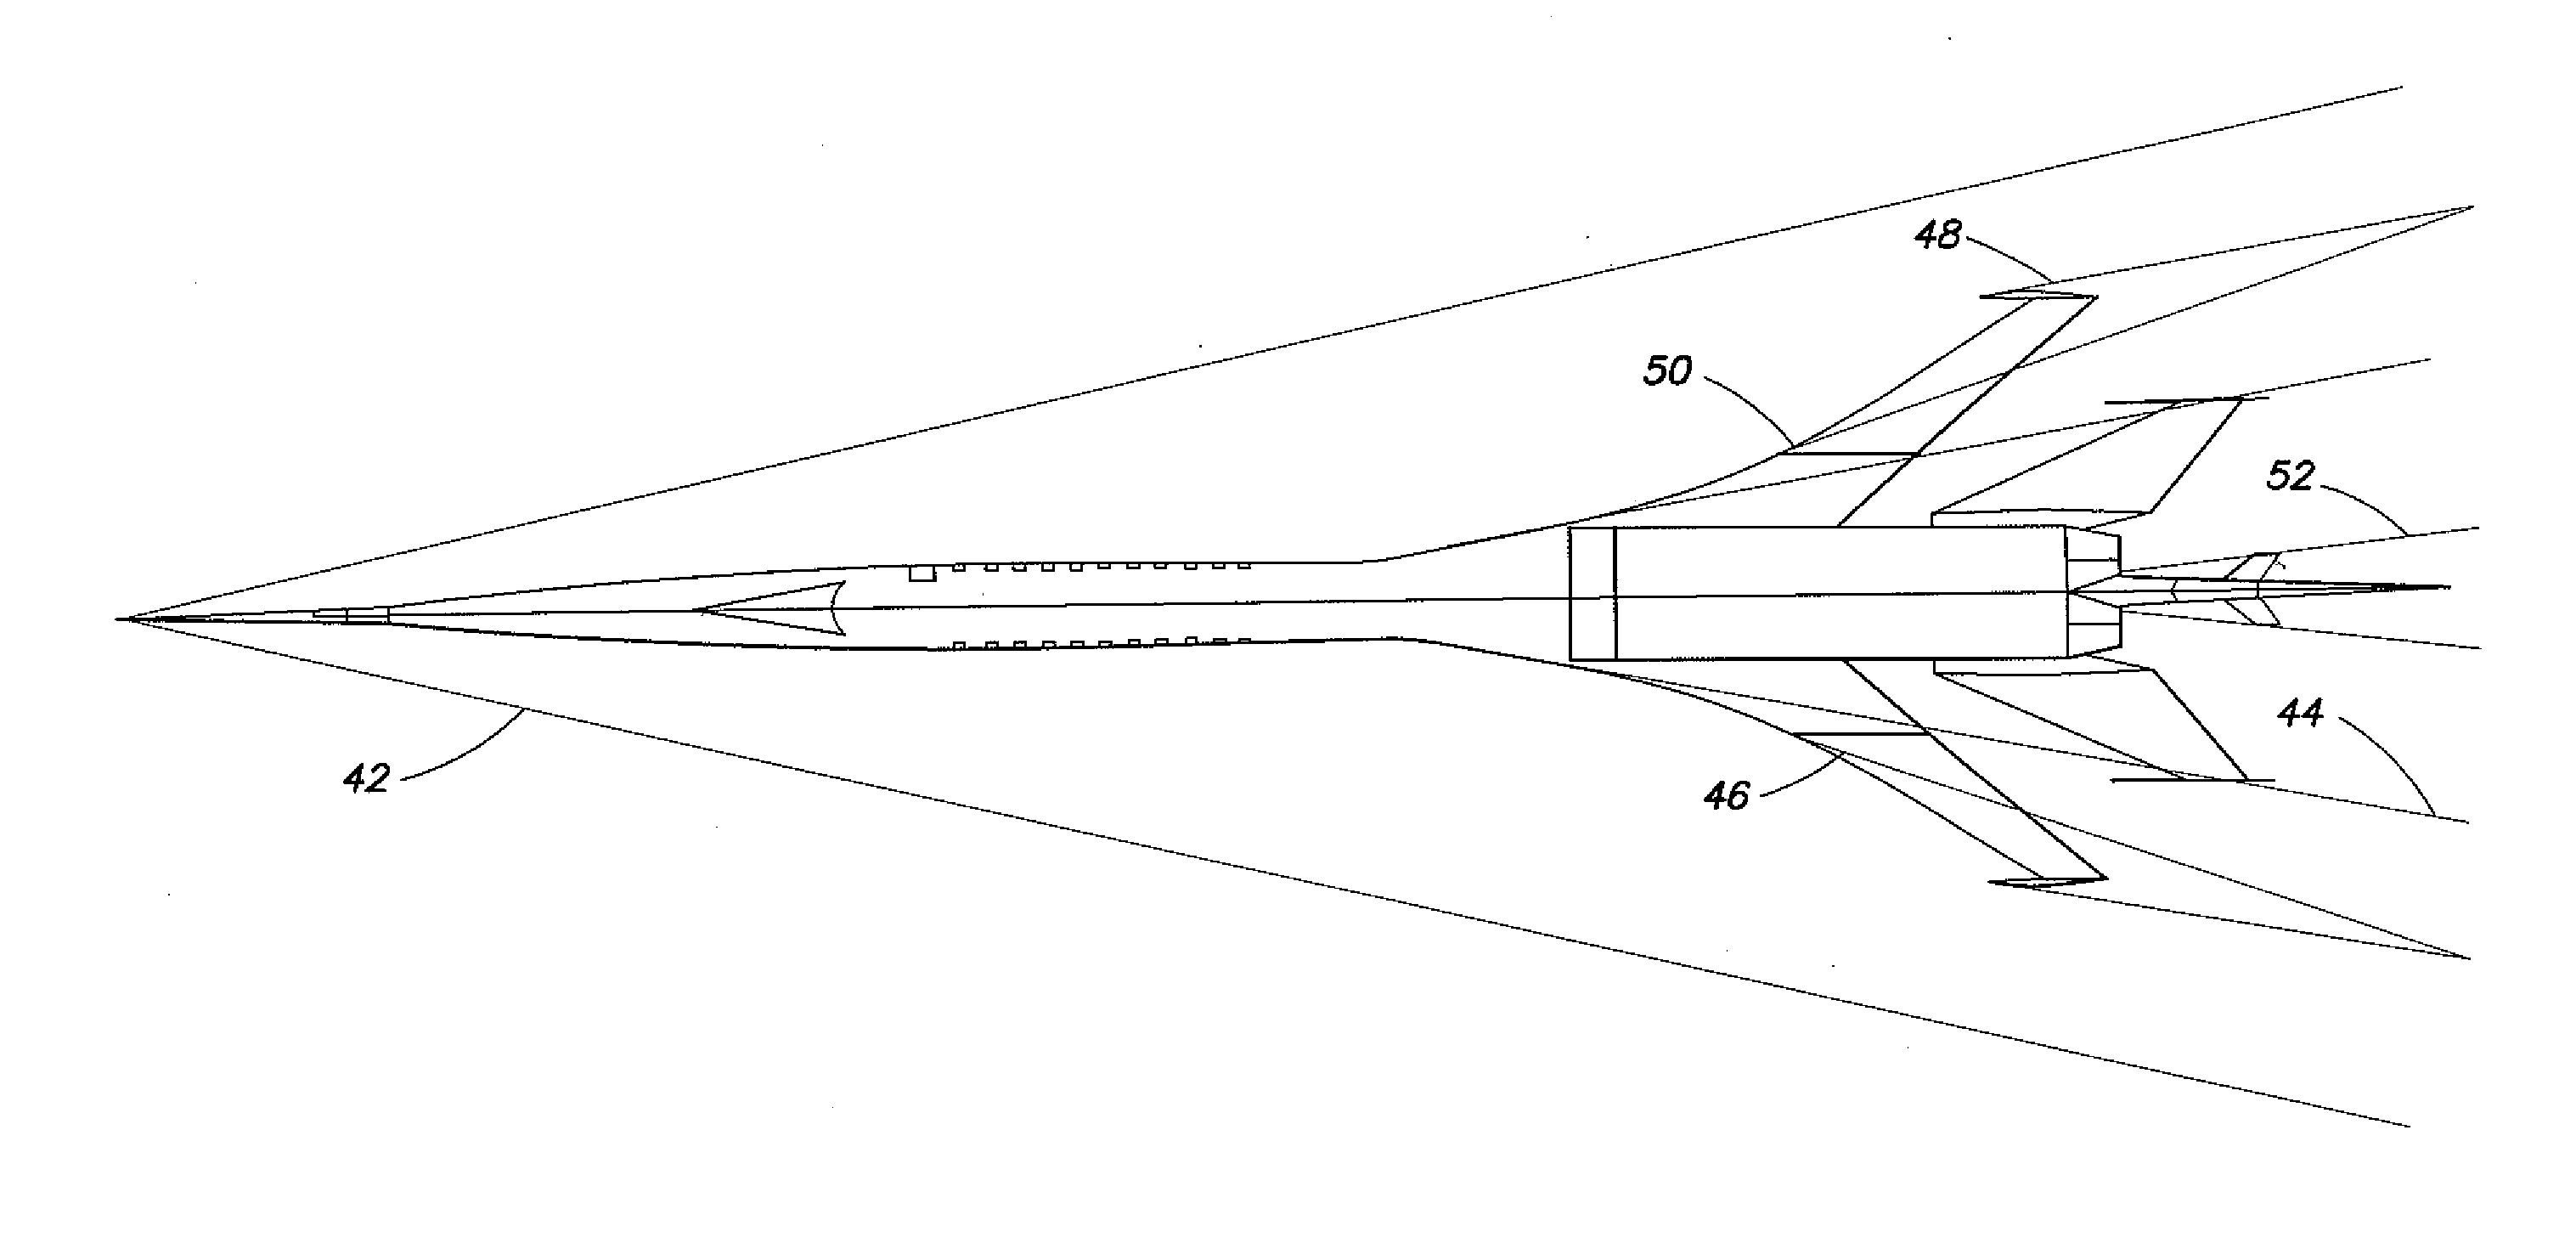 Supersonic aircraft with shockwave canceling aerodynamic configuration